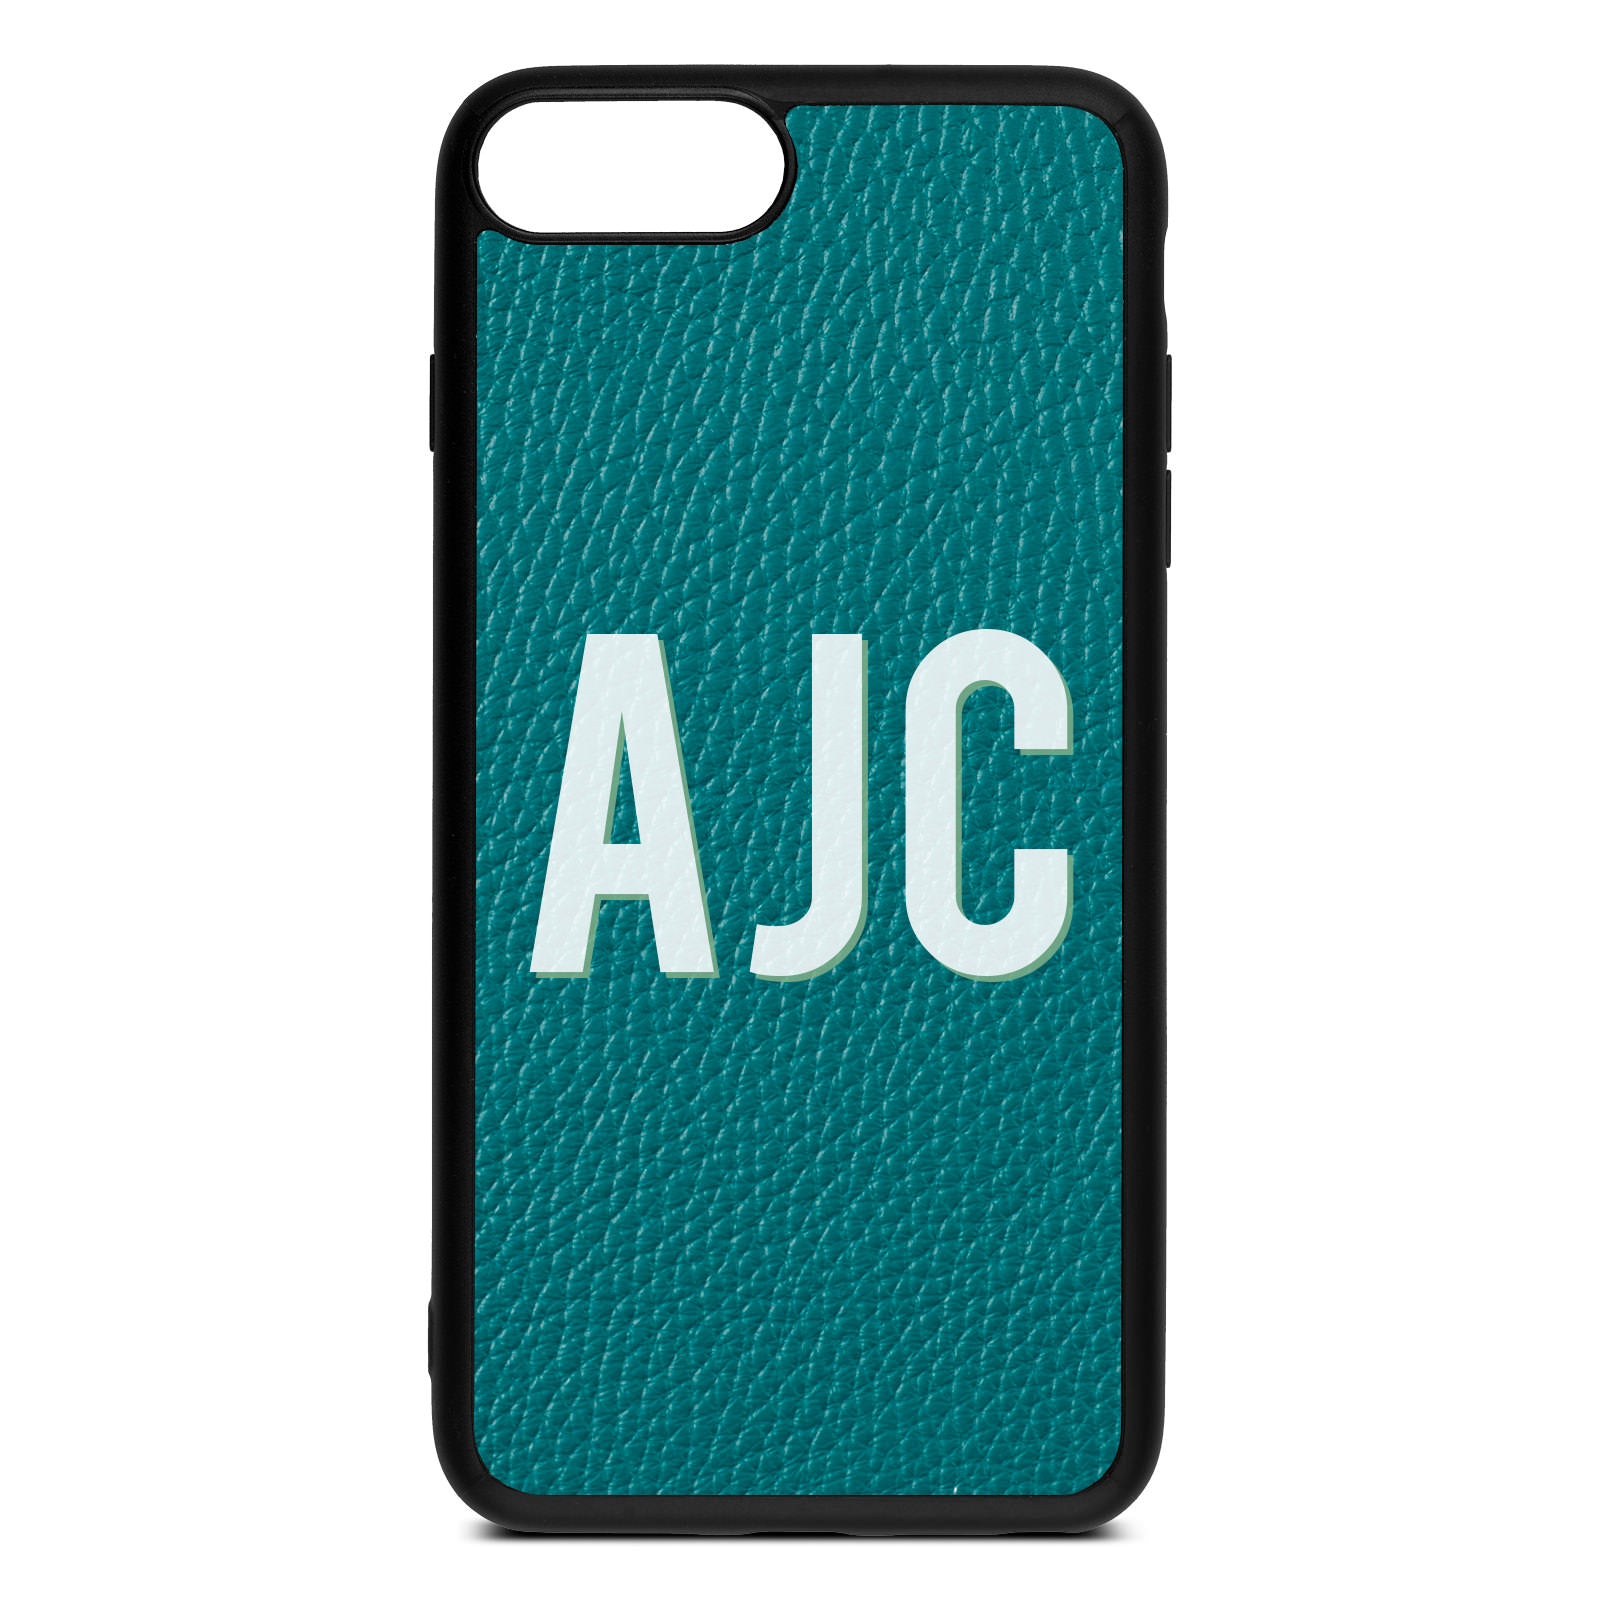 iPhone 8 Plus Pebble Green Leather iPhone Case